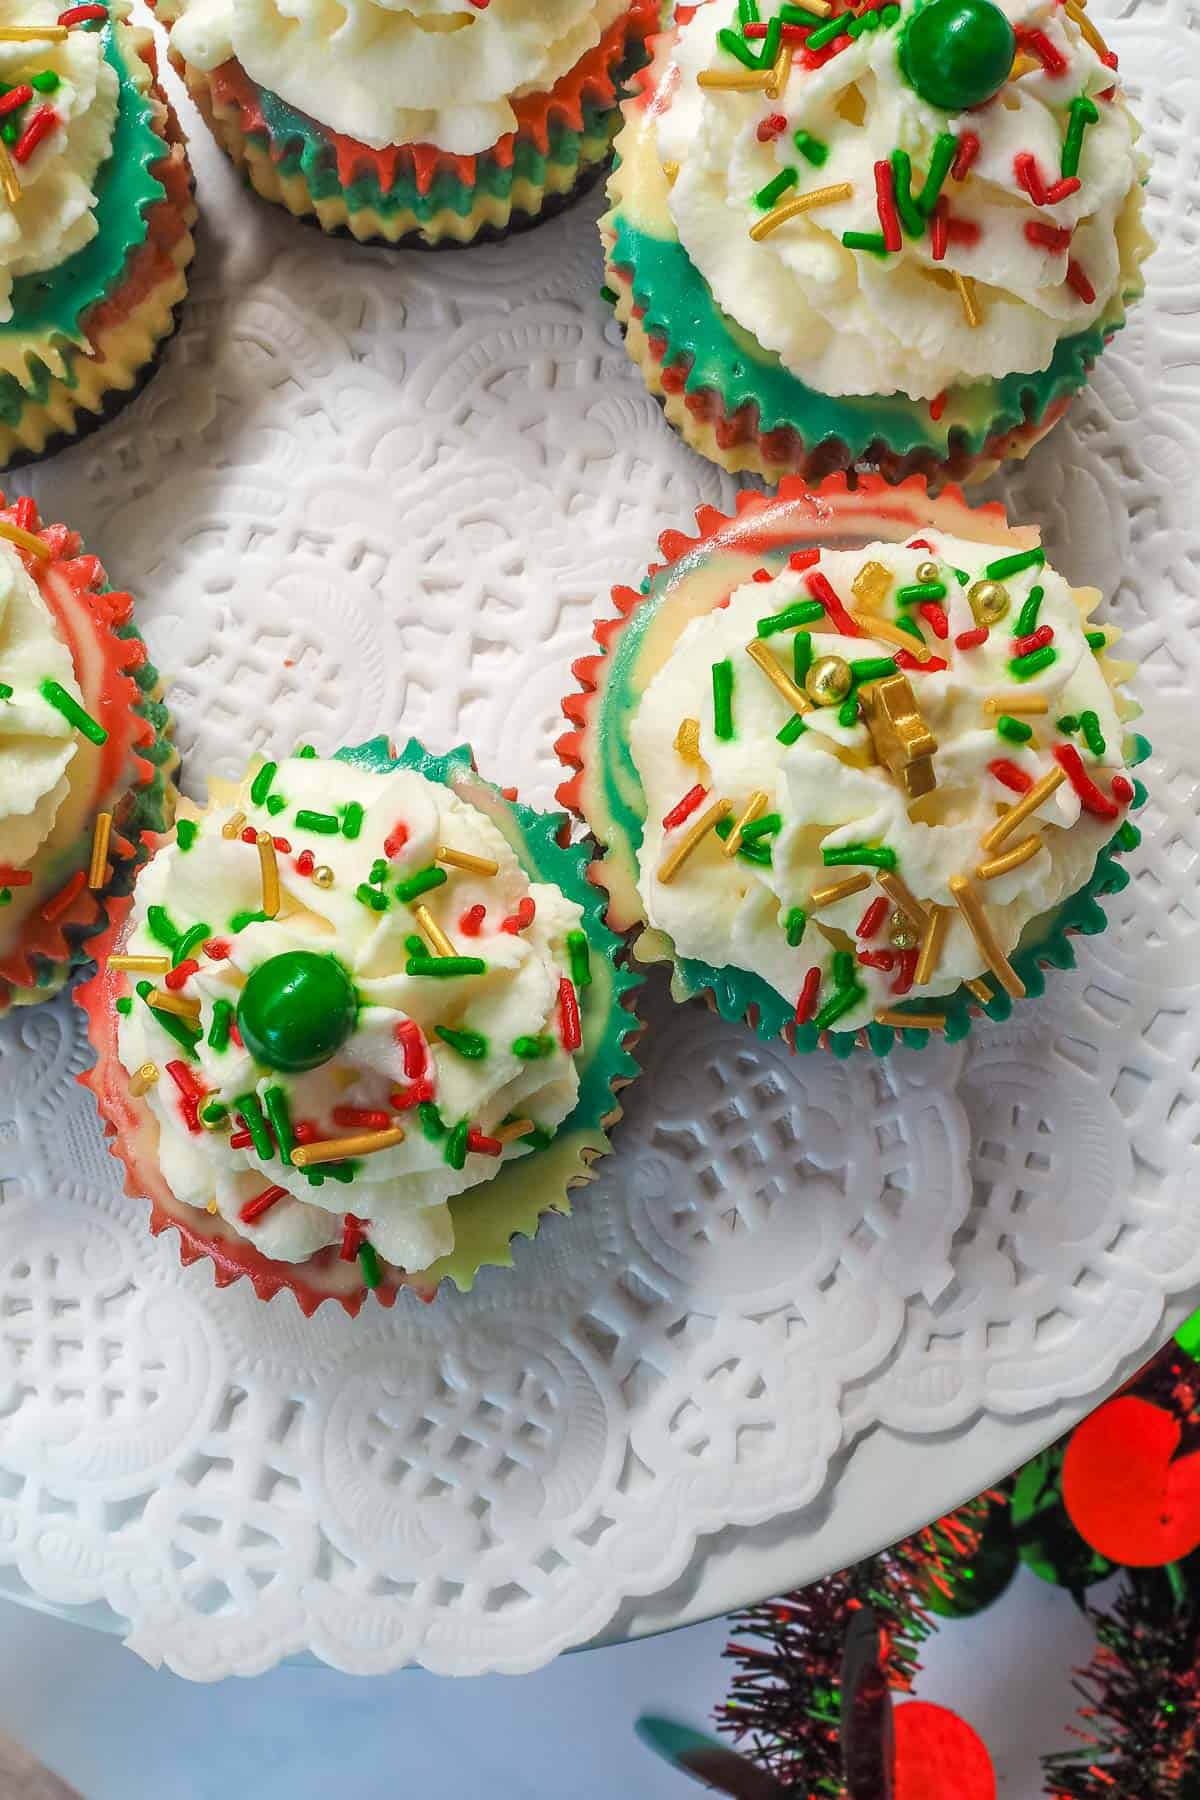 Mini marbled cupcakes topped with whipped cream and Christmas sprinkles.